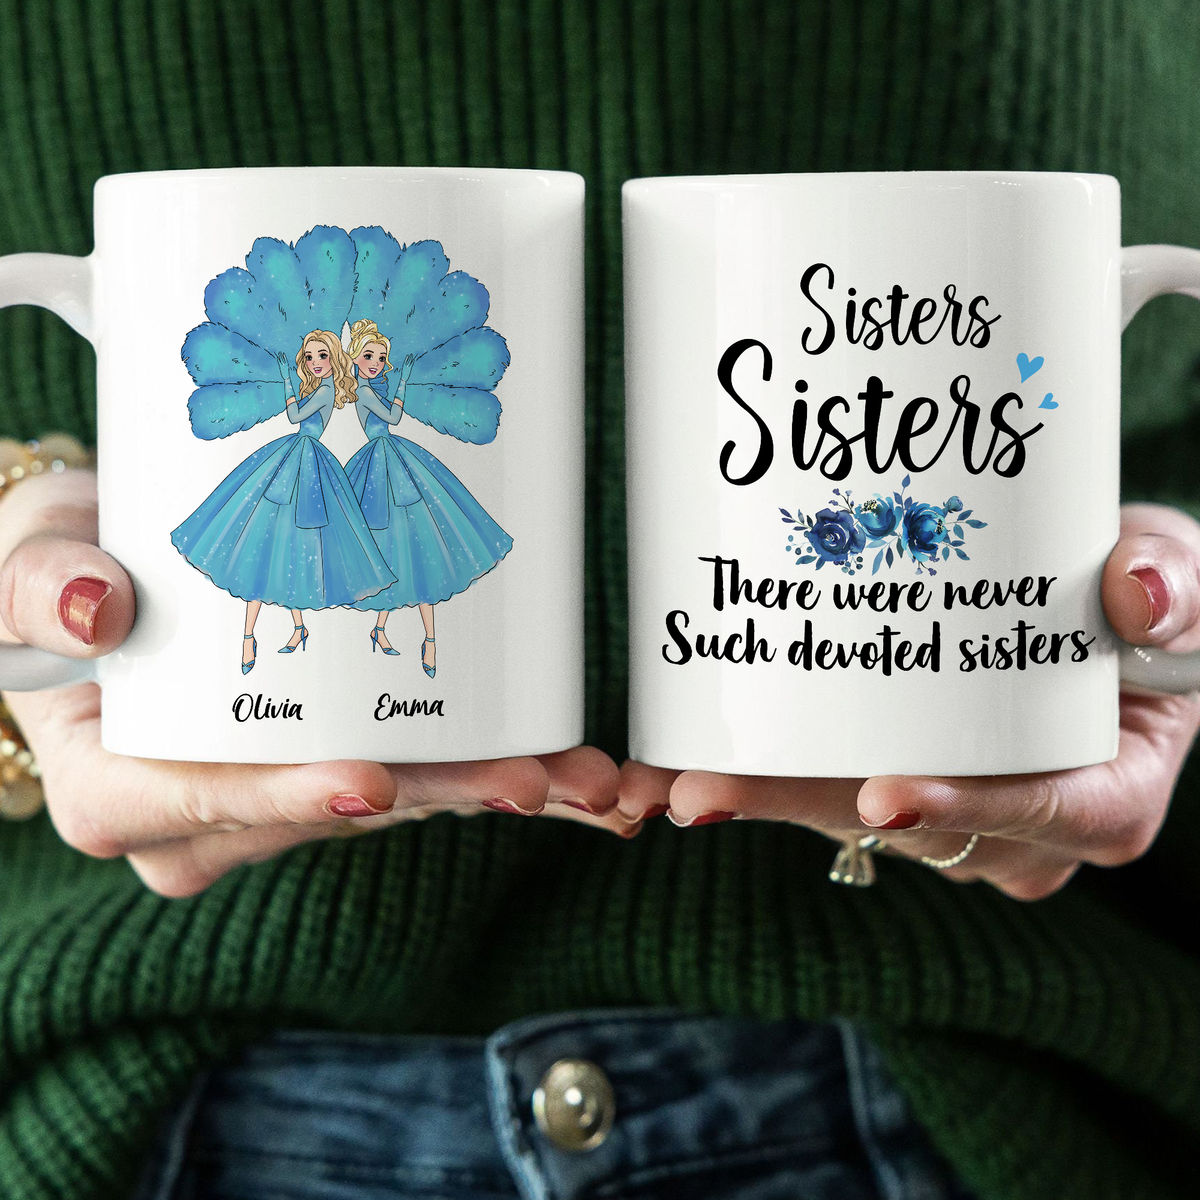 Personalized Mug - Personalized Mug For Sisters - Sisters Sisters - White Christmas - Up To 5 Woman, gift for her, gift for sisters (58095)_4